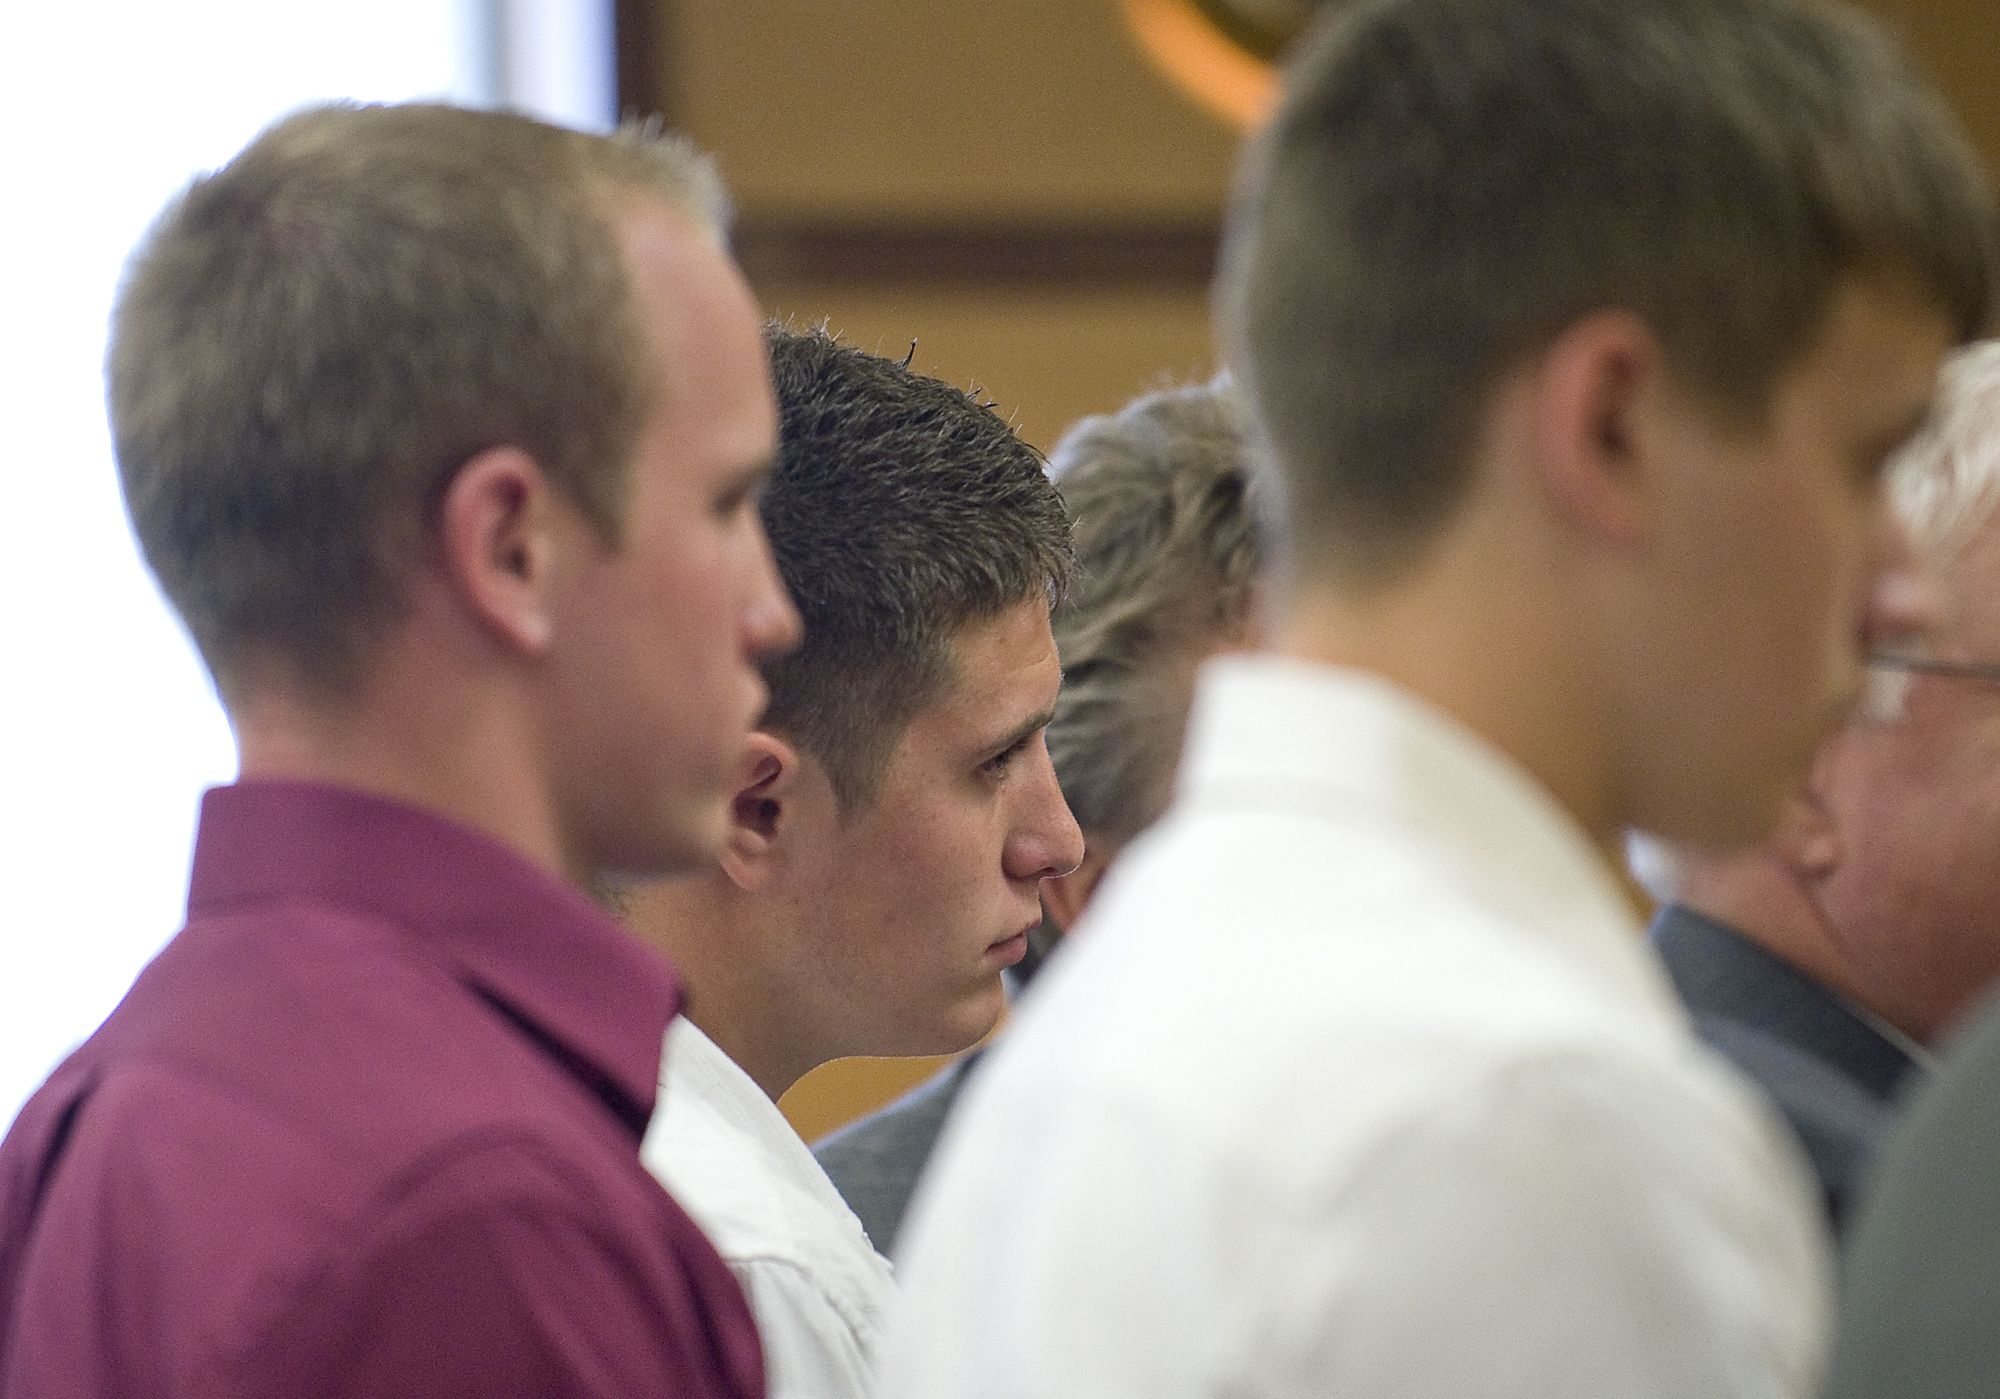 North Clark County teenagers from left, Riley Munger, Mitchell Kangas and Jaren Koistinen make an appearance in court earlier this year.